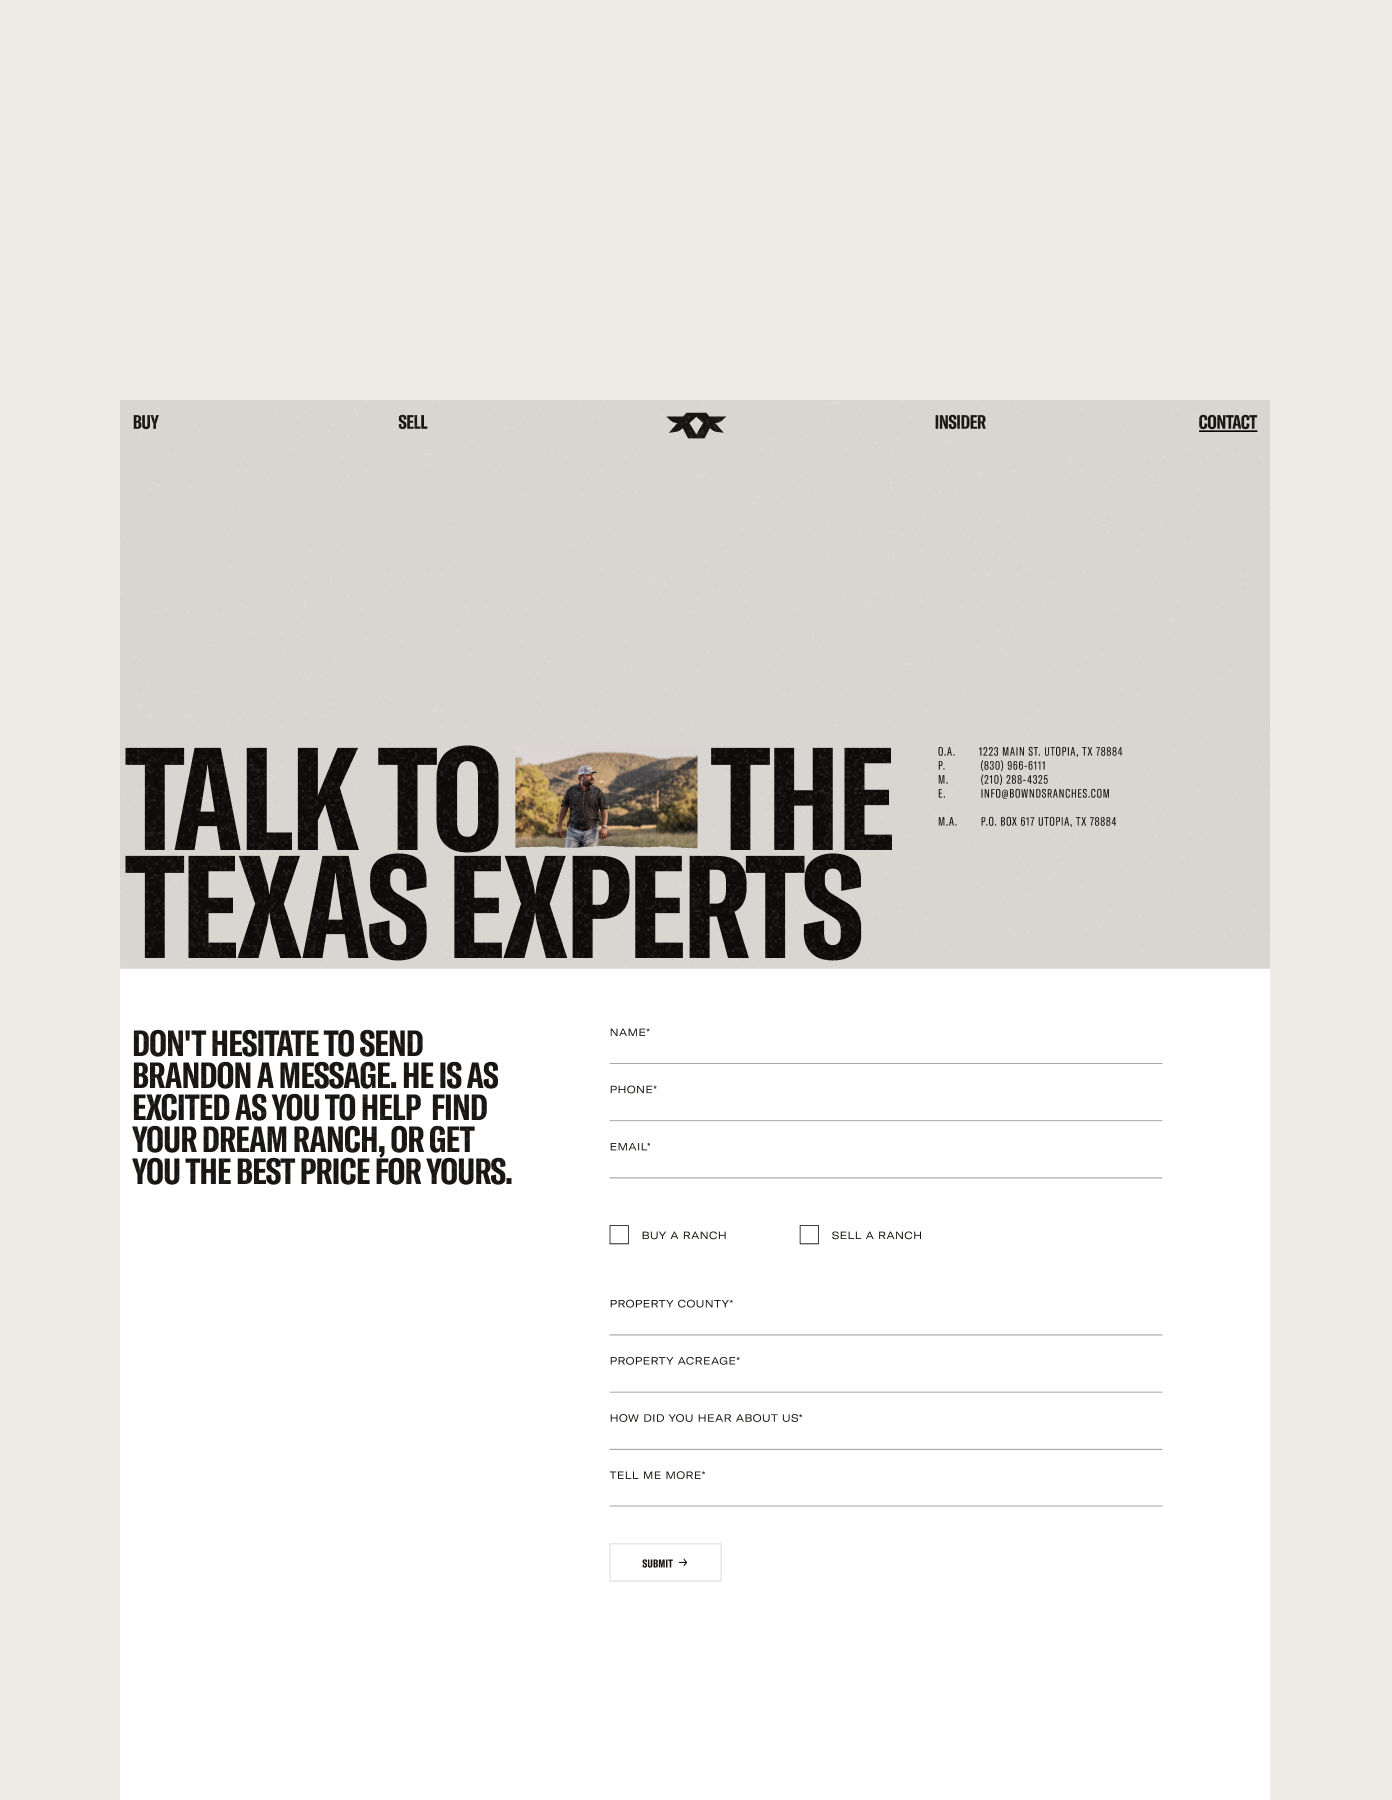 Bownds Ranches new contact page design